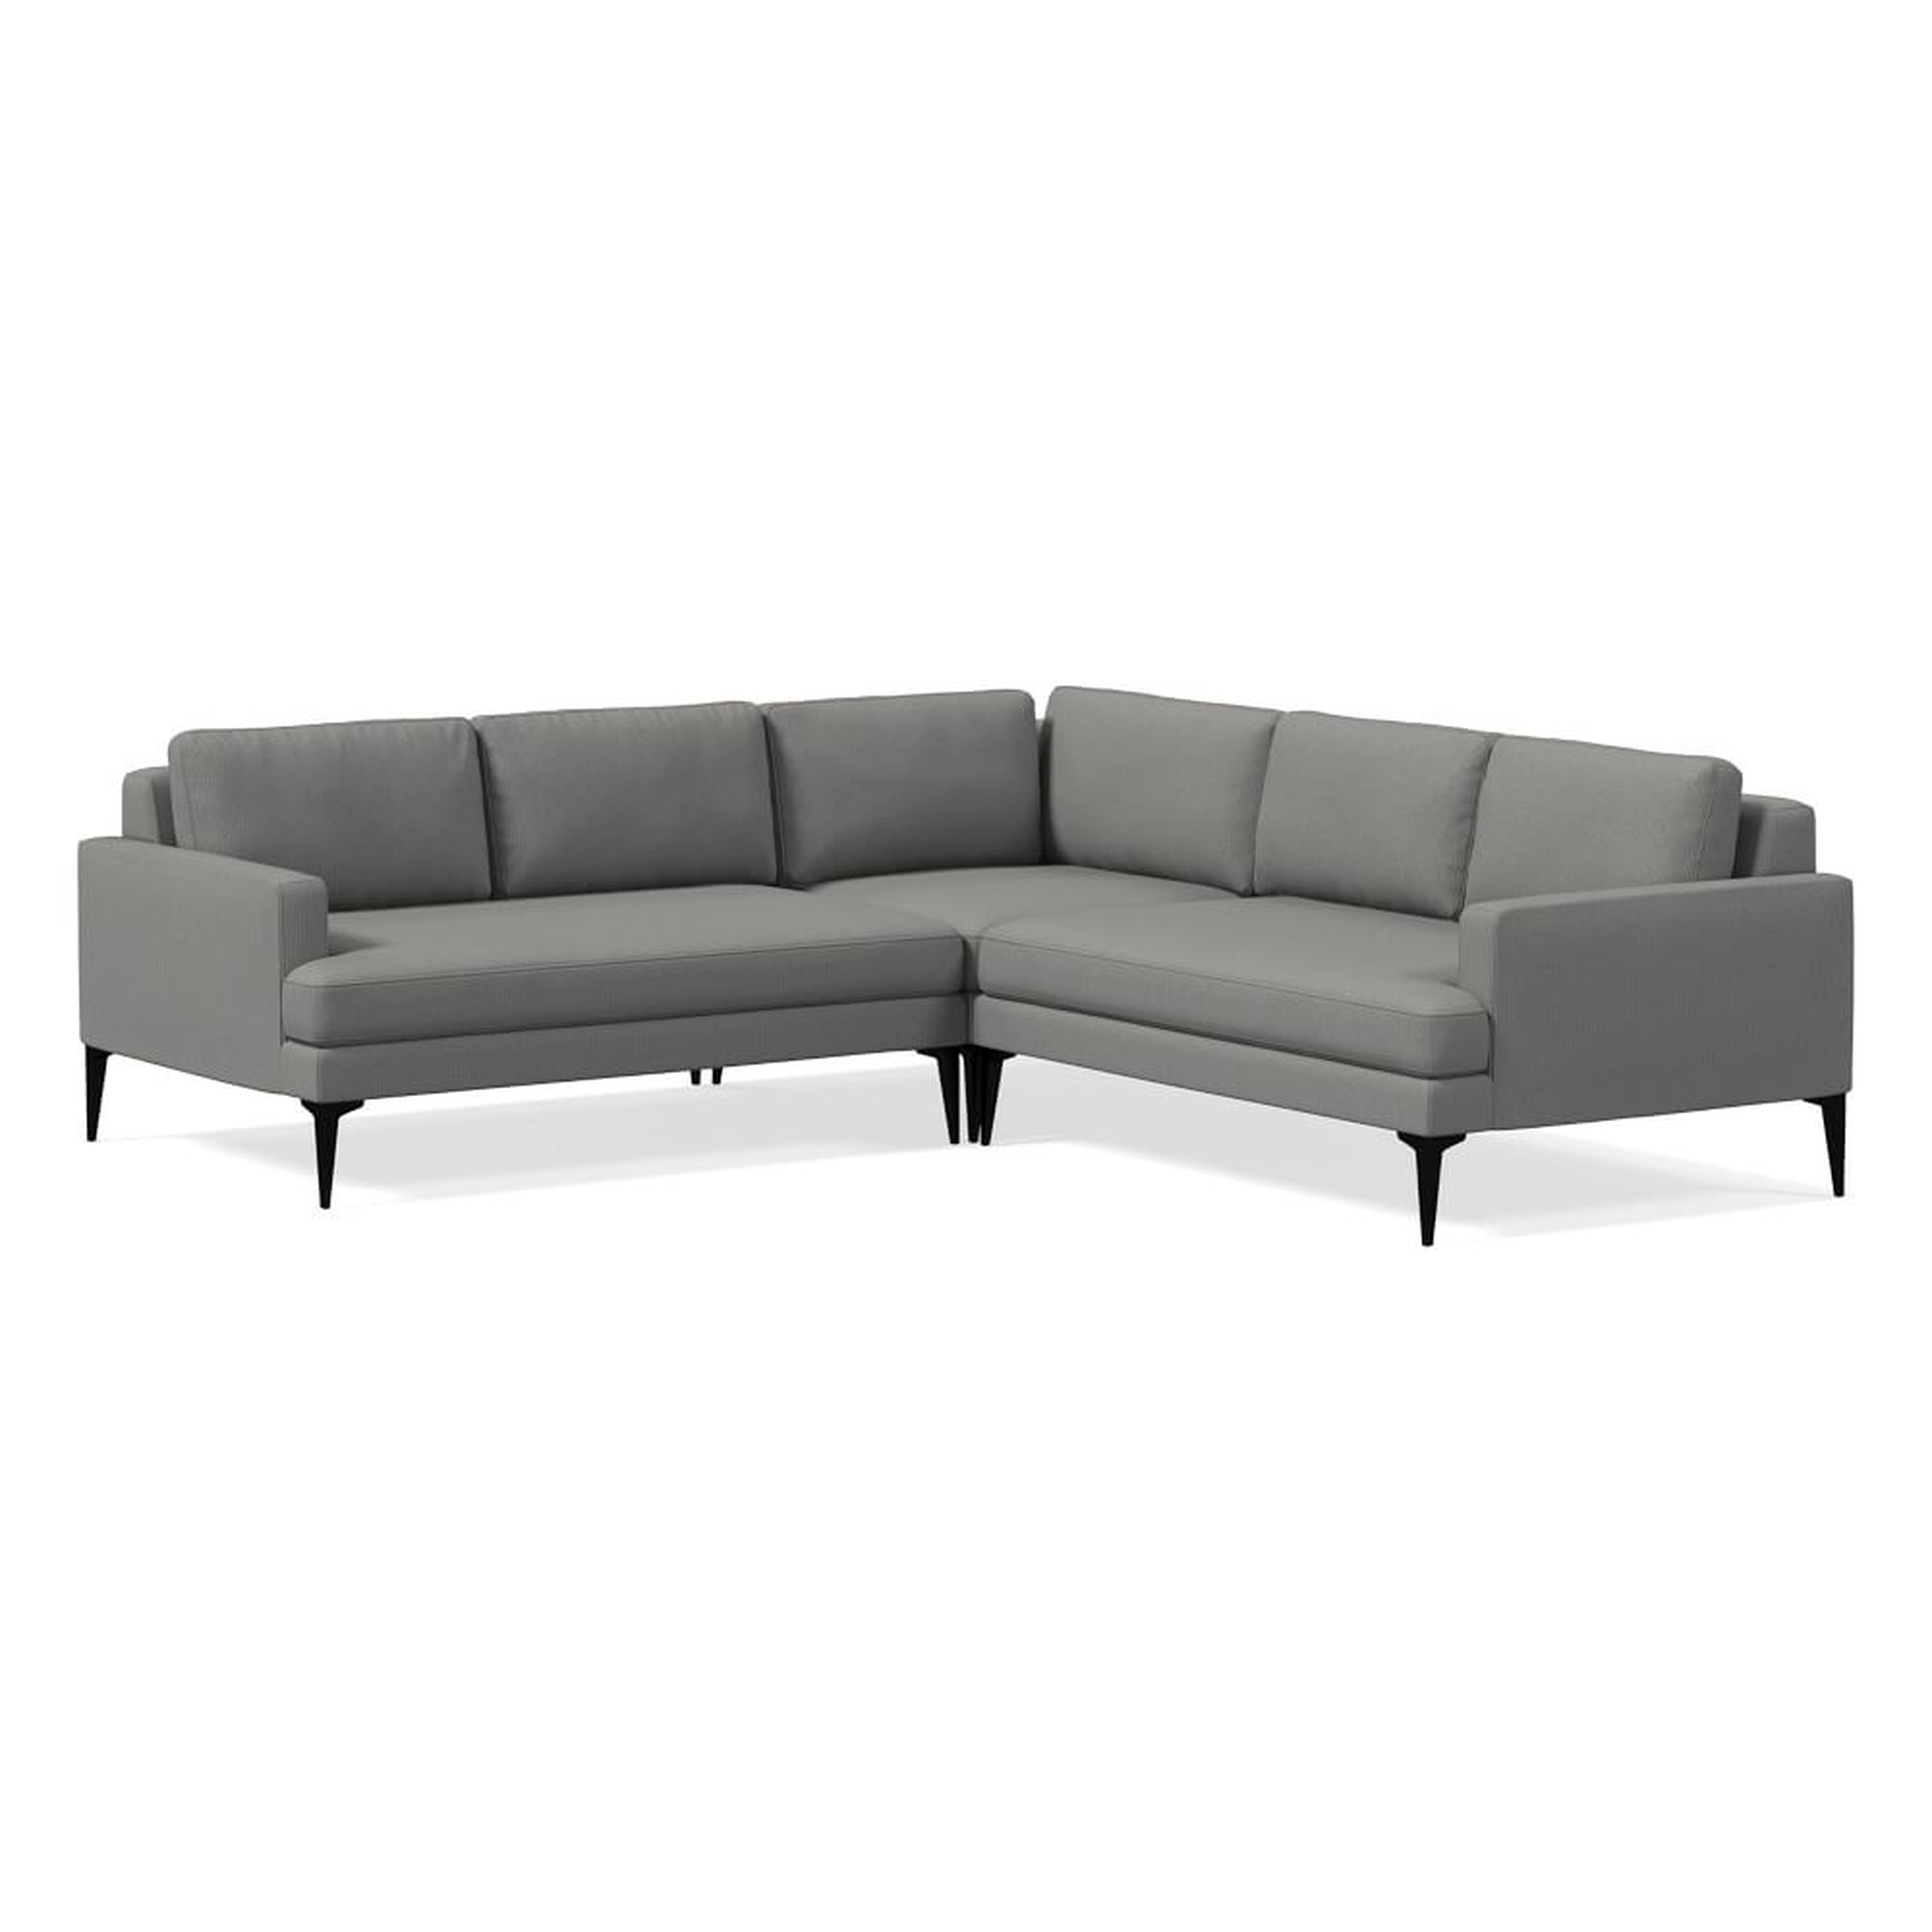 Andes Sectional Set 06: Left Arm 2 Seater Sofa, Corner, Right Arm 2 Seater Sofa, Poly , Performance Washed Canvas, Storm Gray, Dark Pewter - West Elm